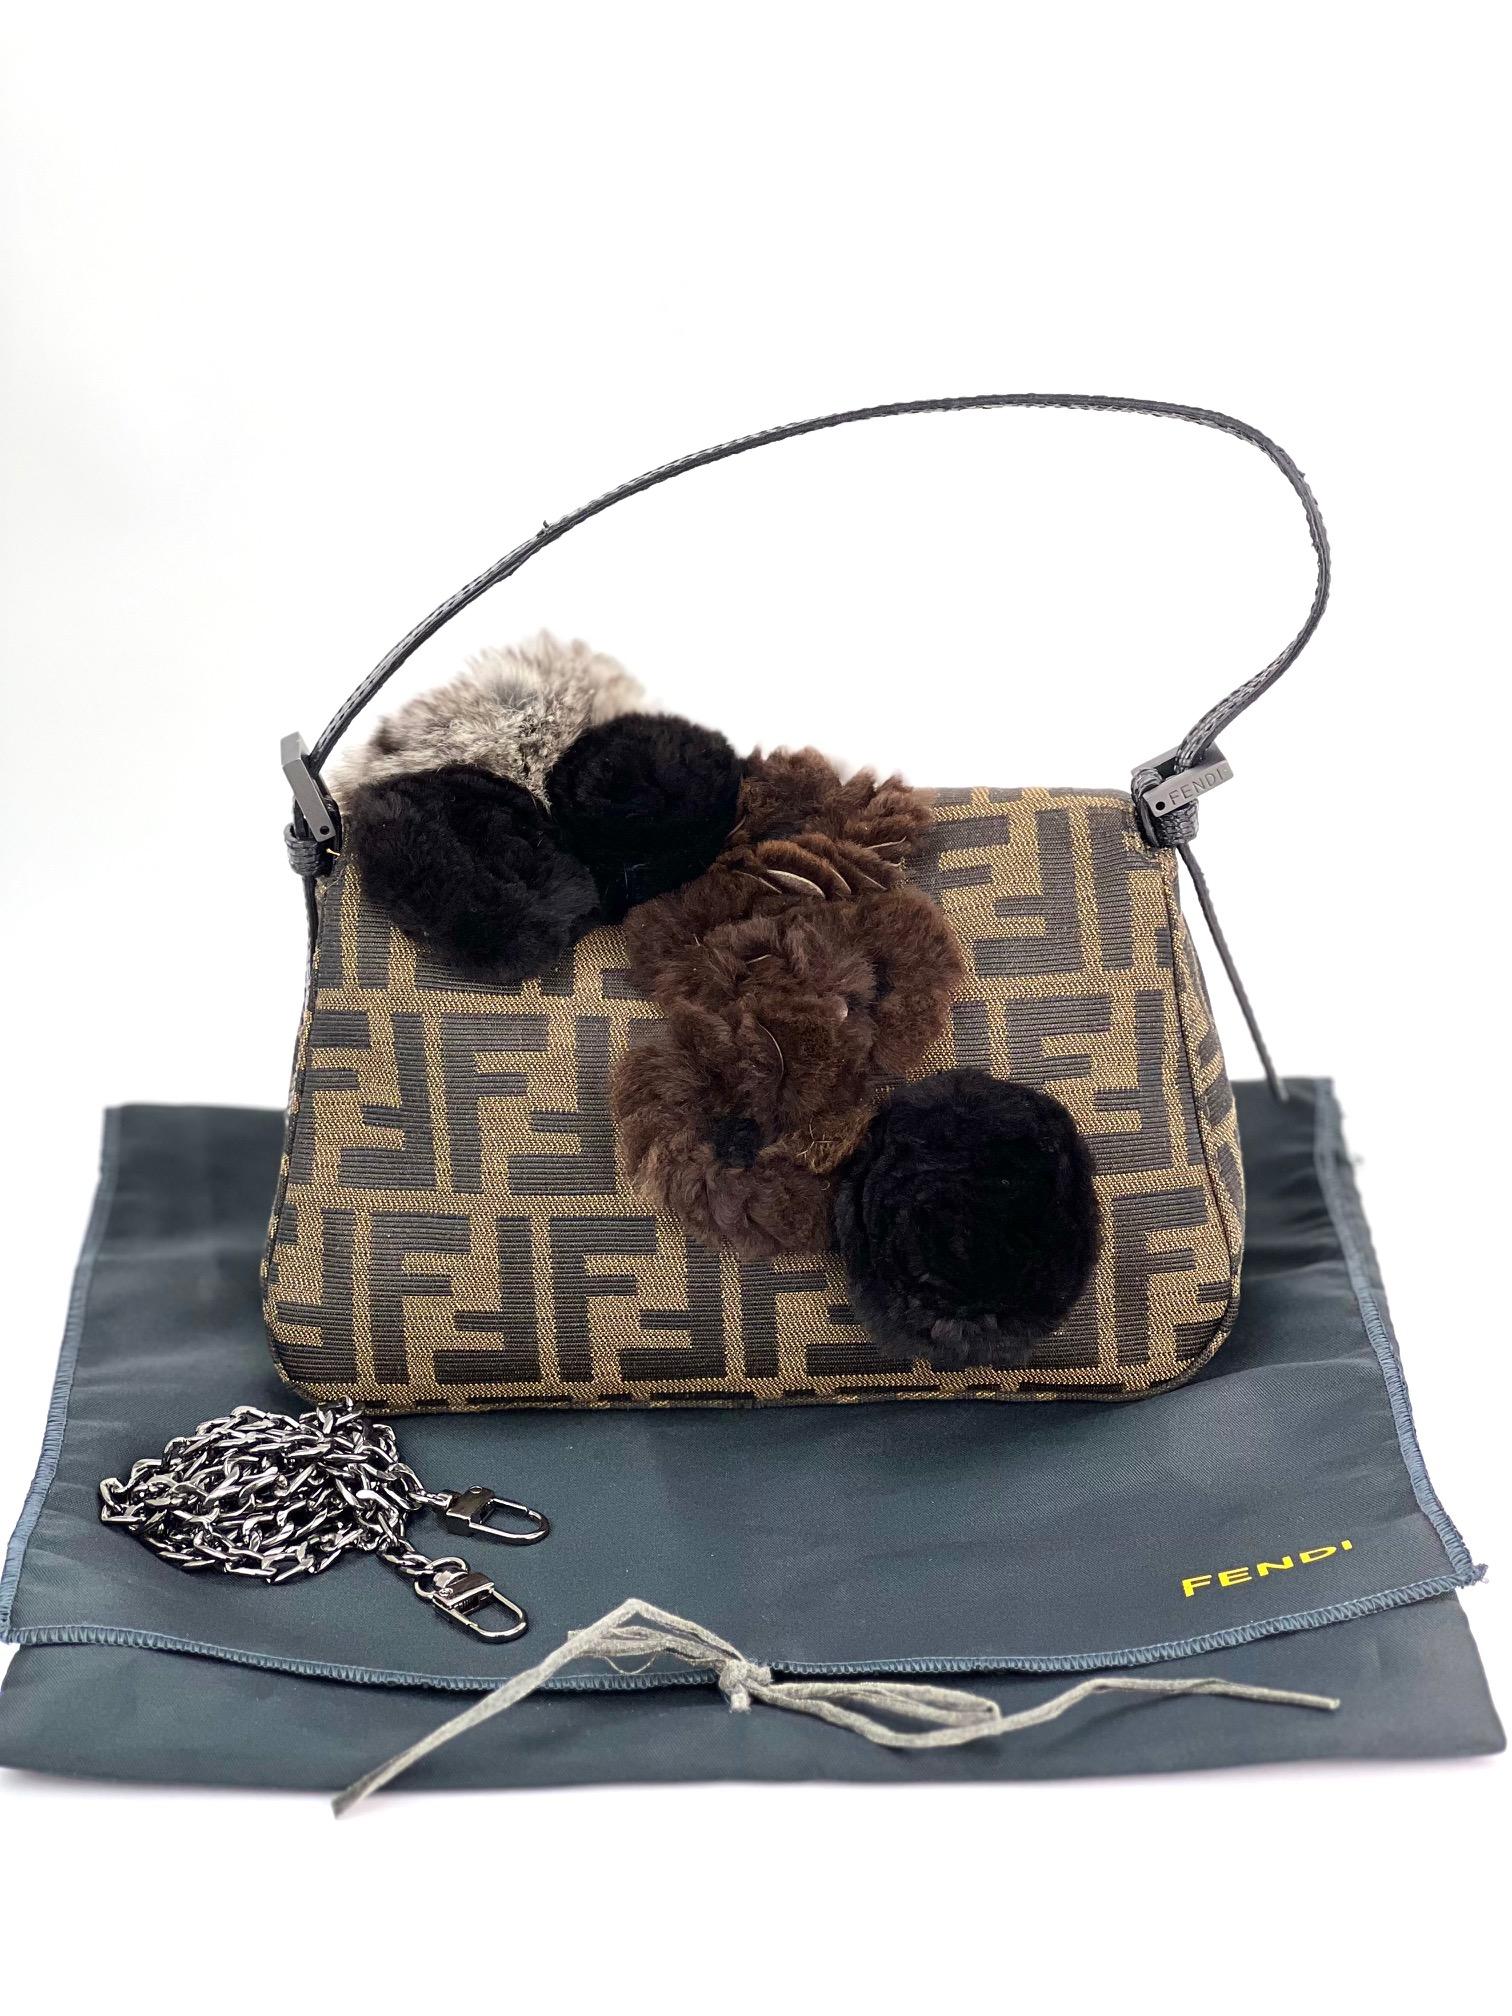 FENDI Zucchino Mini Mama Baguette With  Rabbit Embellishments Bag In Excellent Condition For Sale In Freehold, NJ